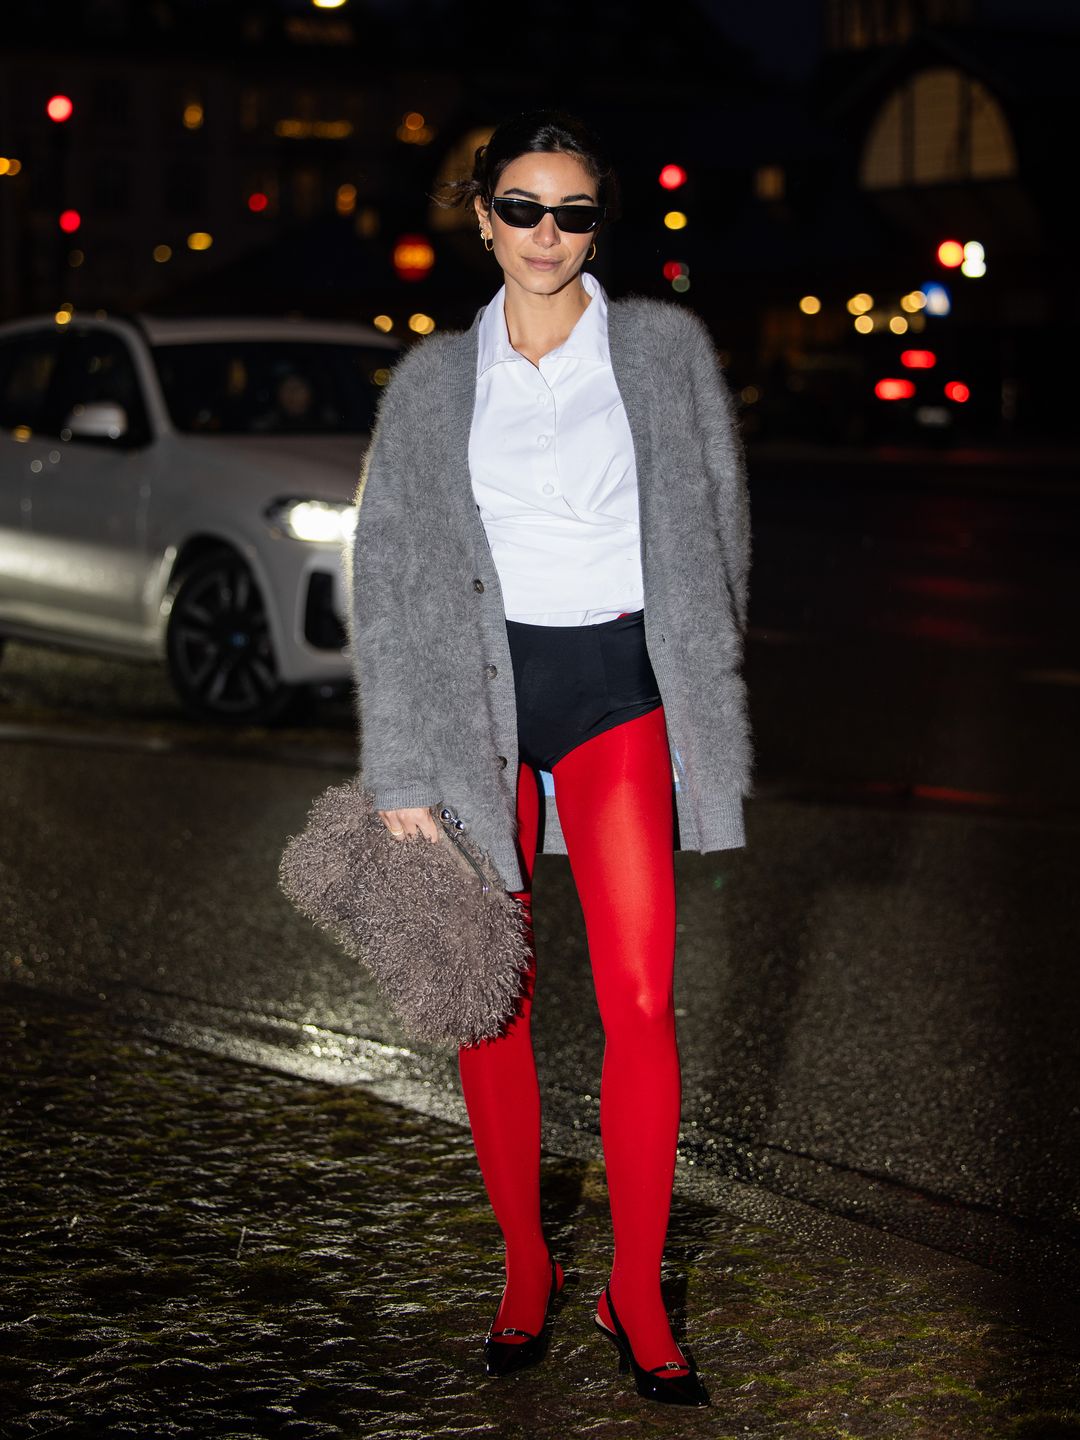 Street Style: The Latest News and Photos  Fashion, Fashion tights, Dress  and heels